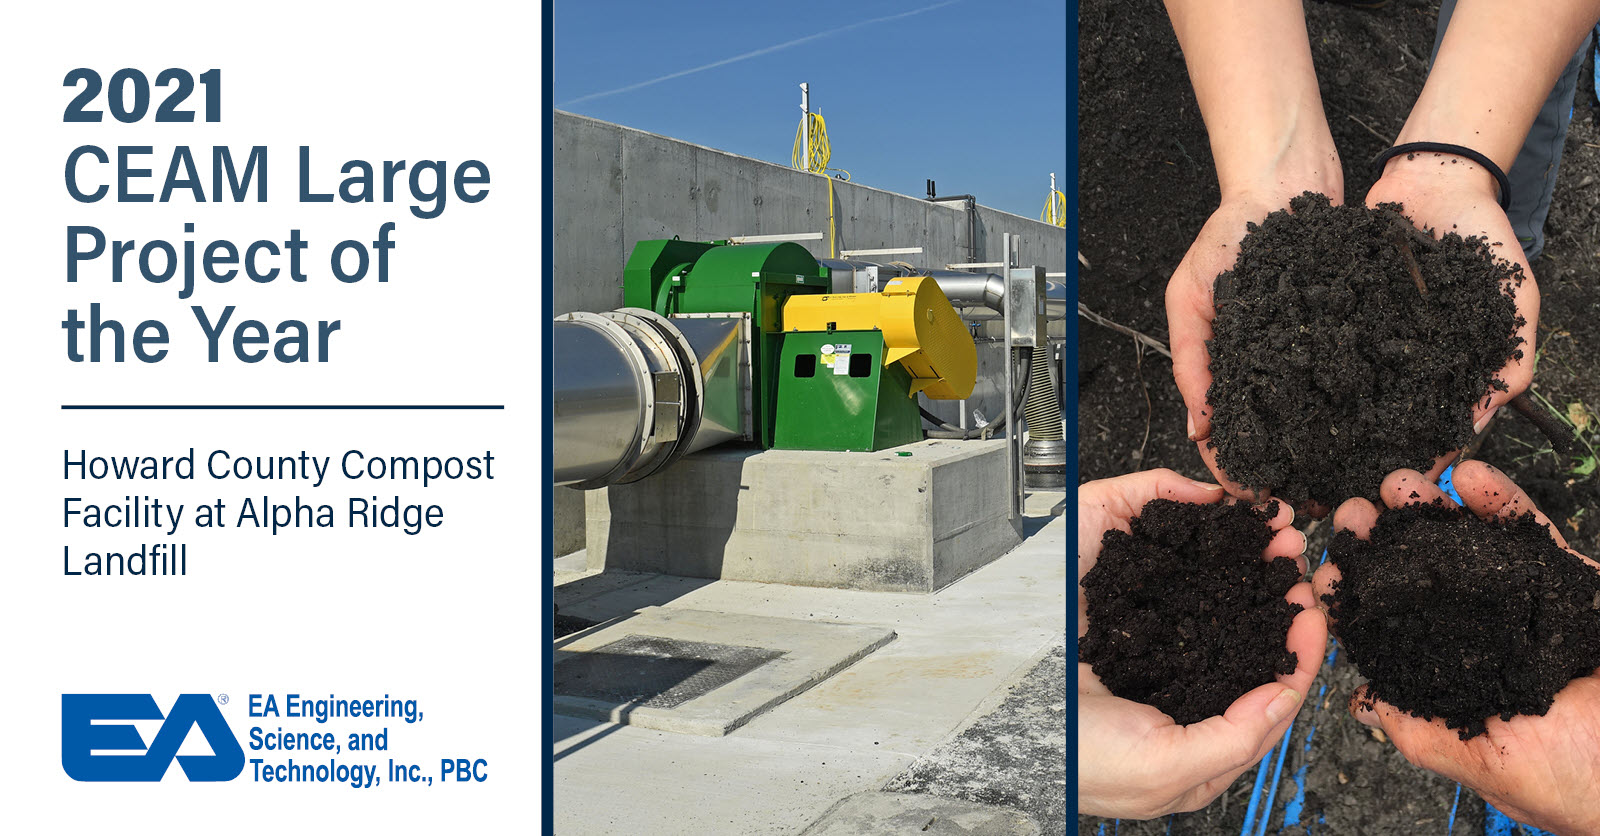 Howard County Compost Facility Honored as Large Project of the Year by CEAM